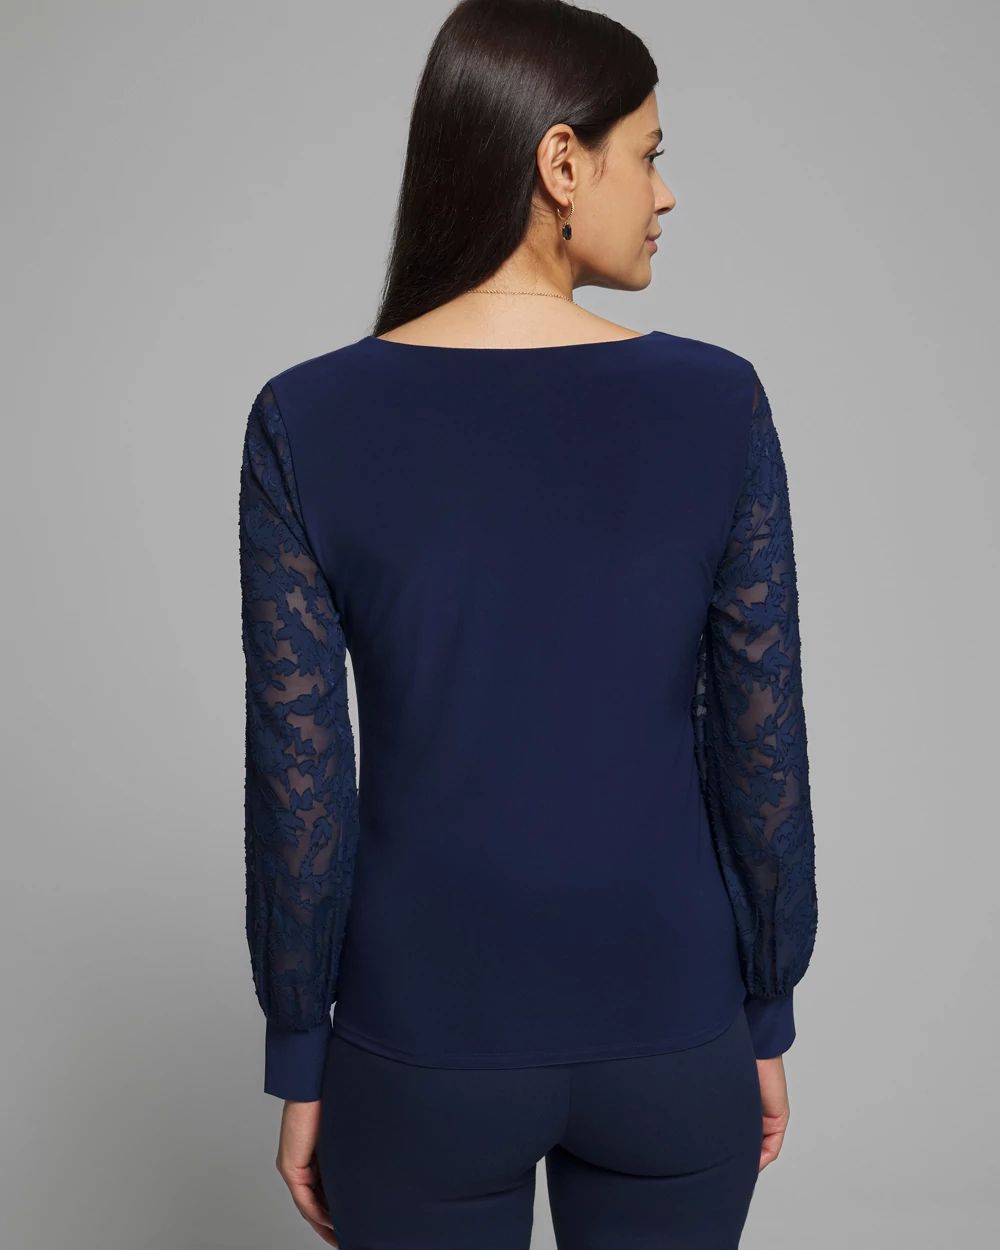 Outlet WHBM Long Sleeve V-Neck Top click to view larger image.